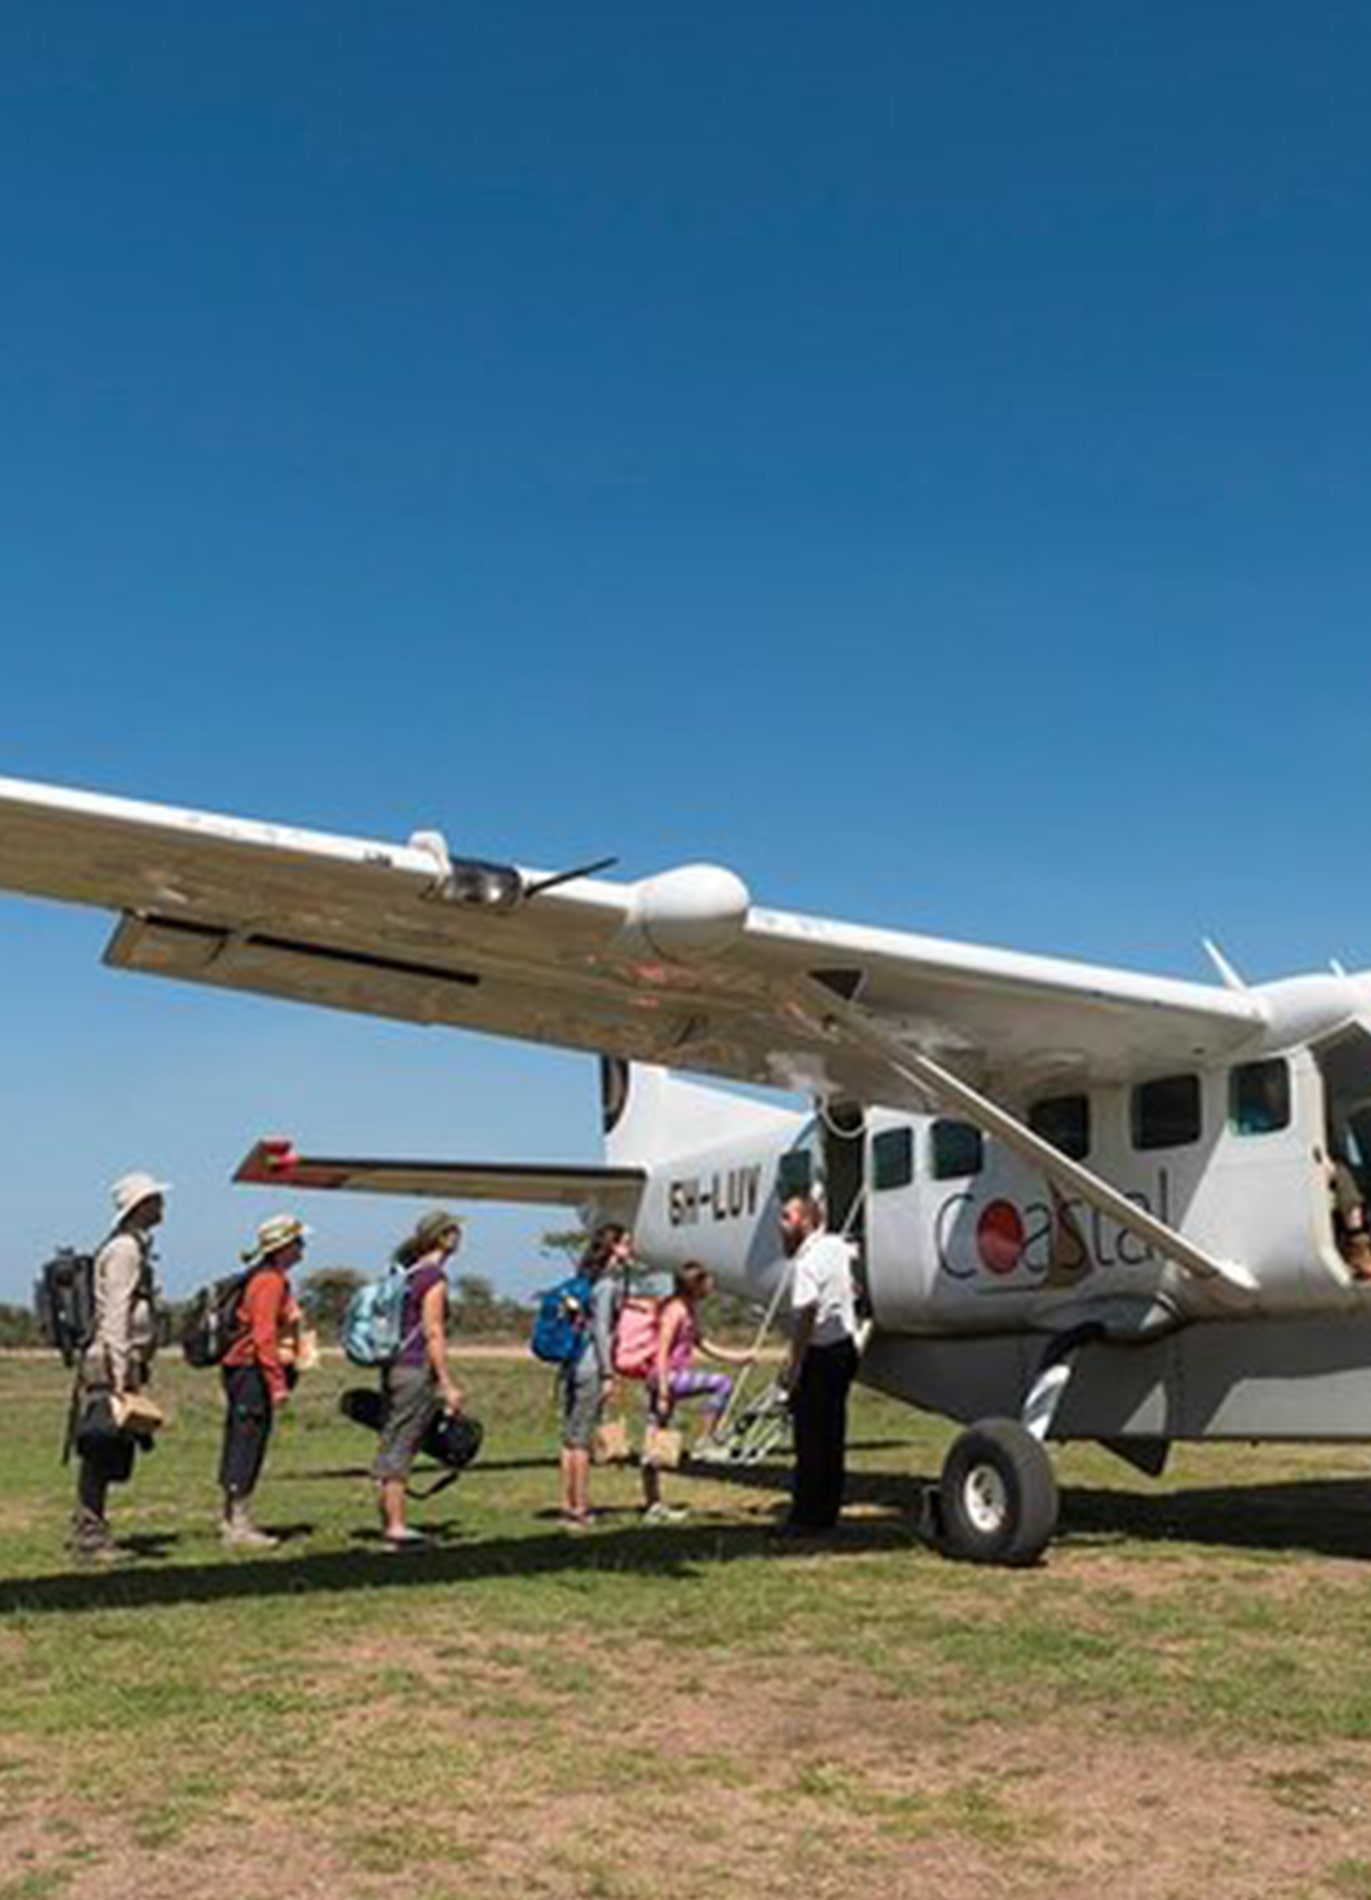 Day Trip Fly-in Safari to Selous Game Reserve from Zanzibar